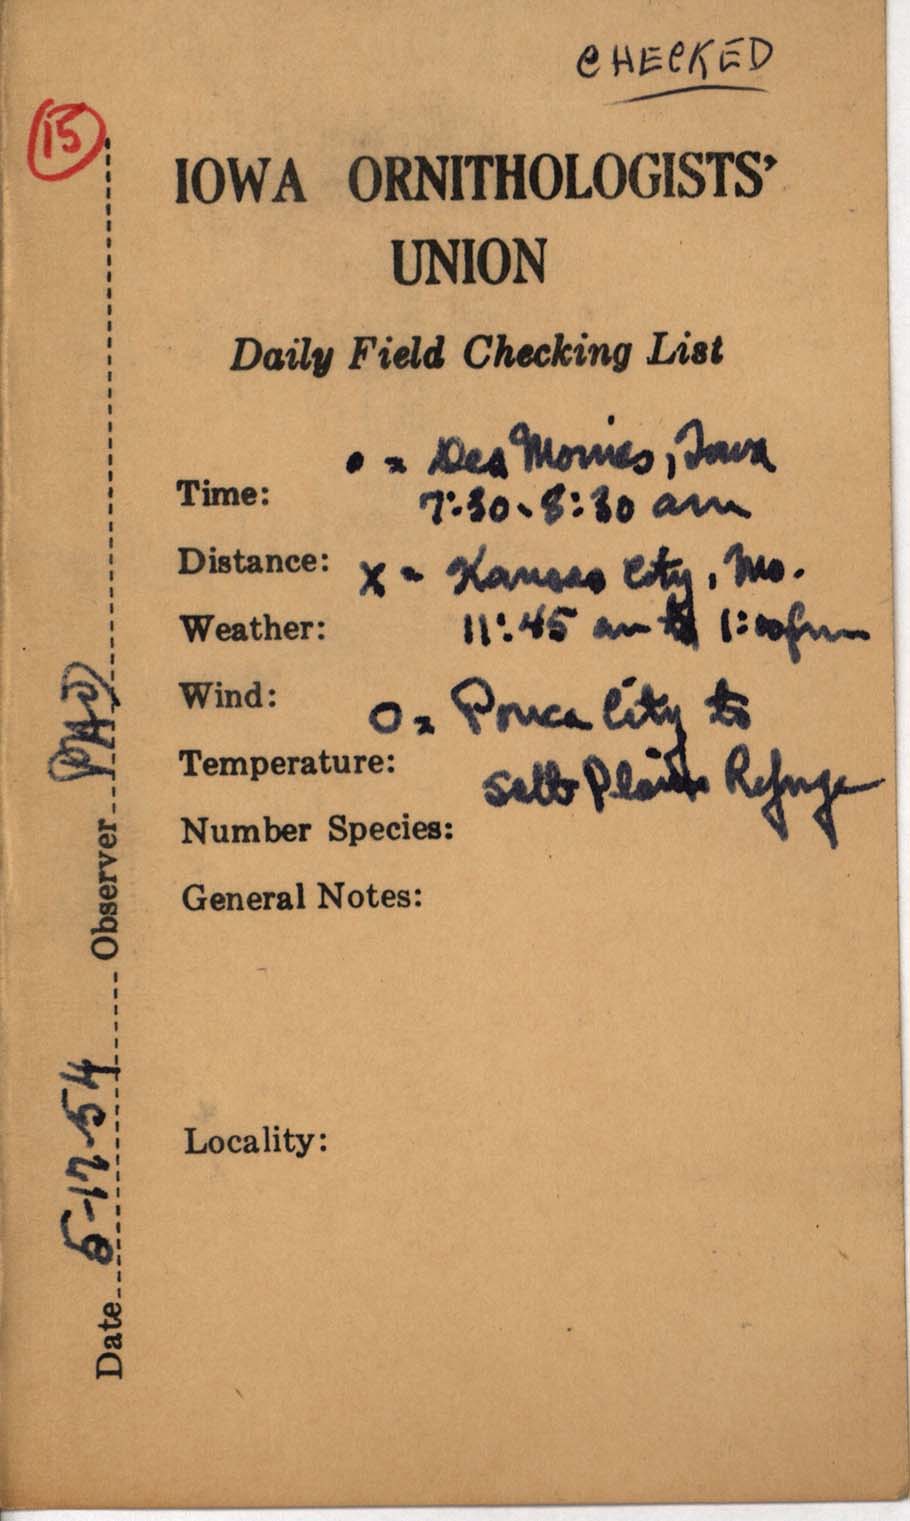 Daily field checking list, Philip DuMont, May 17, 1954